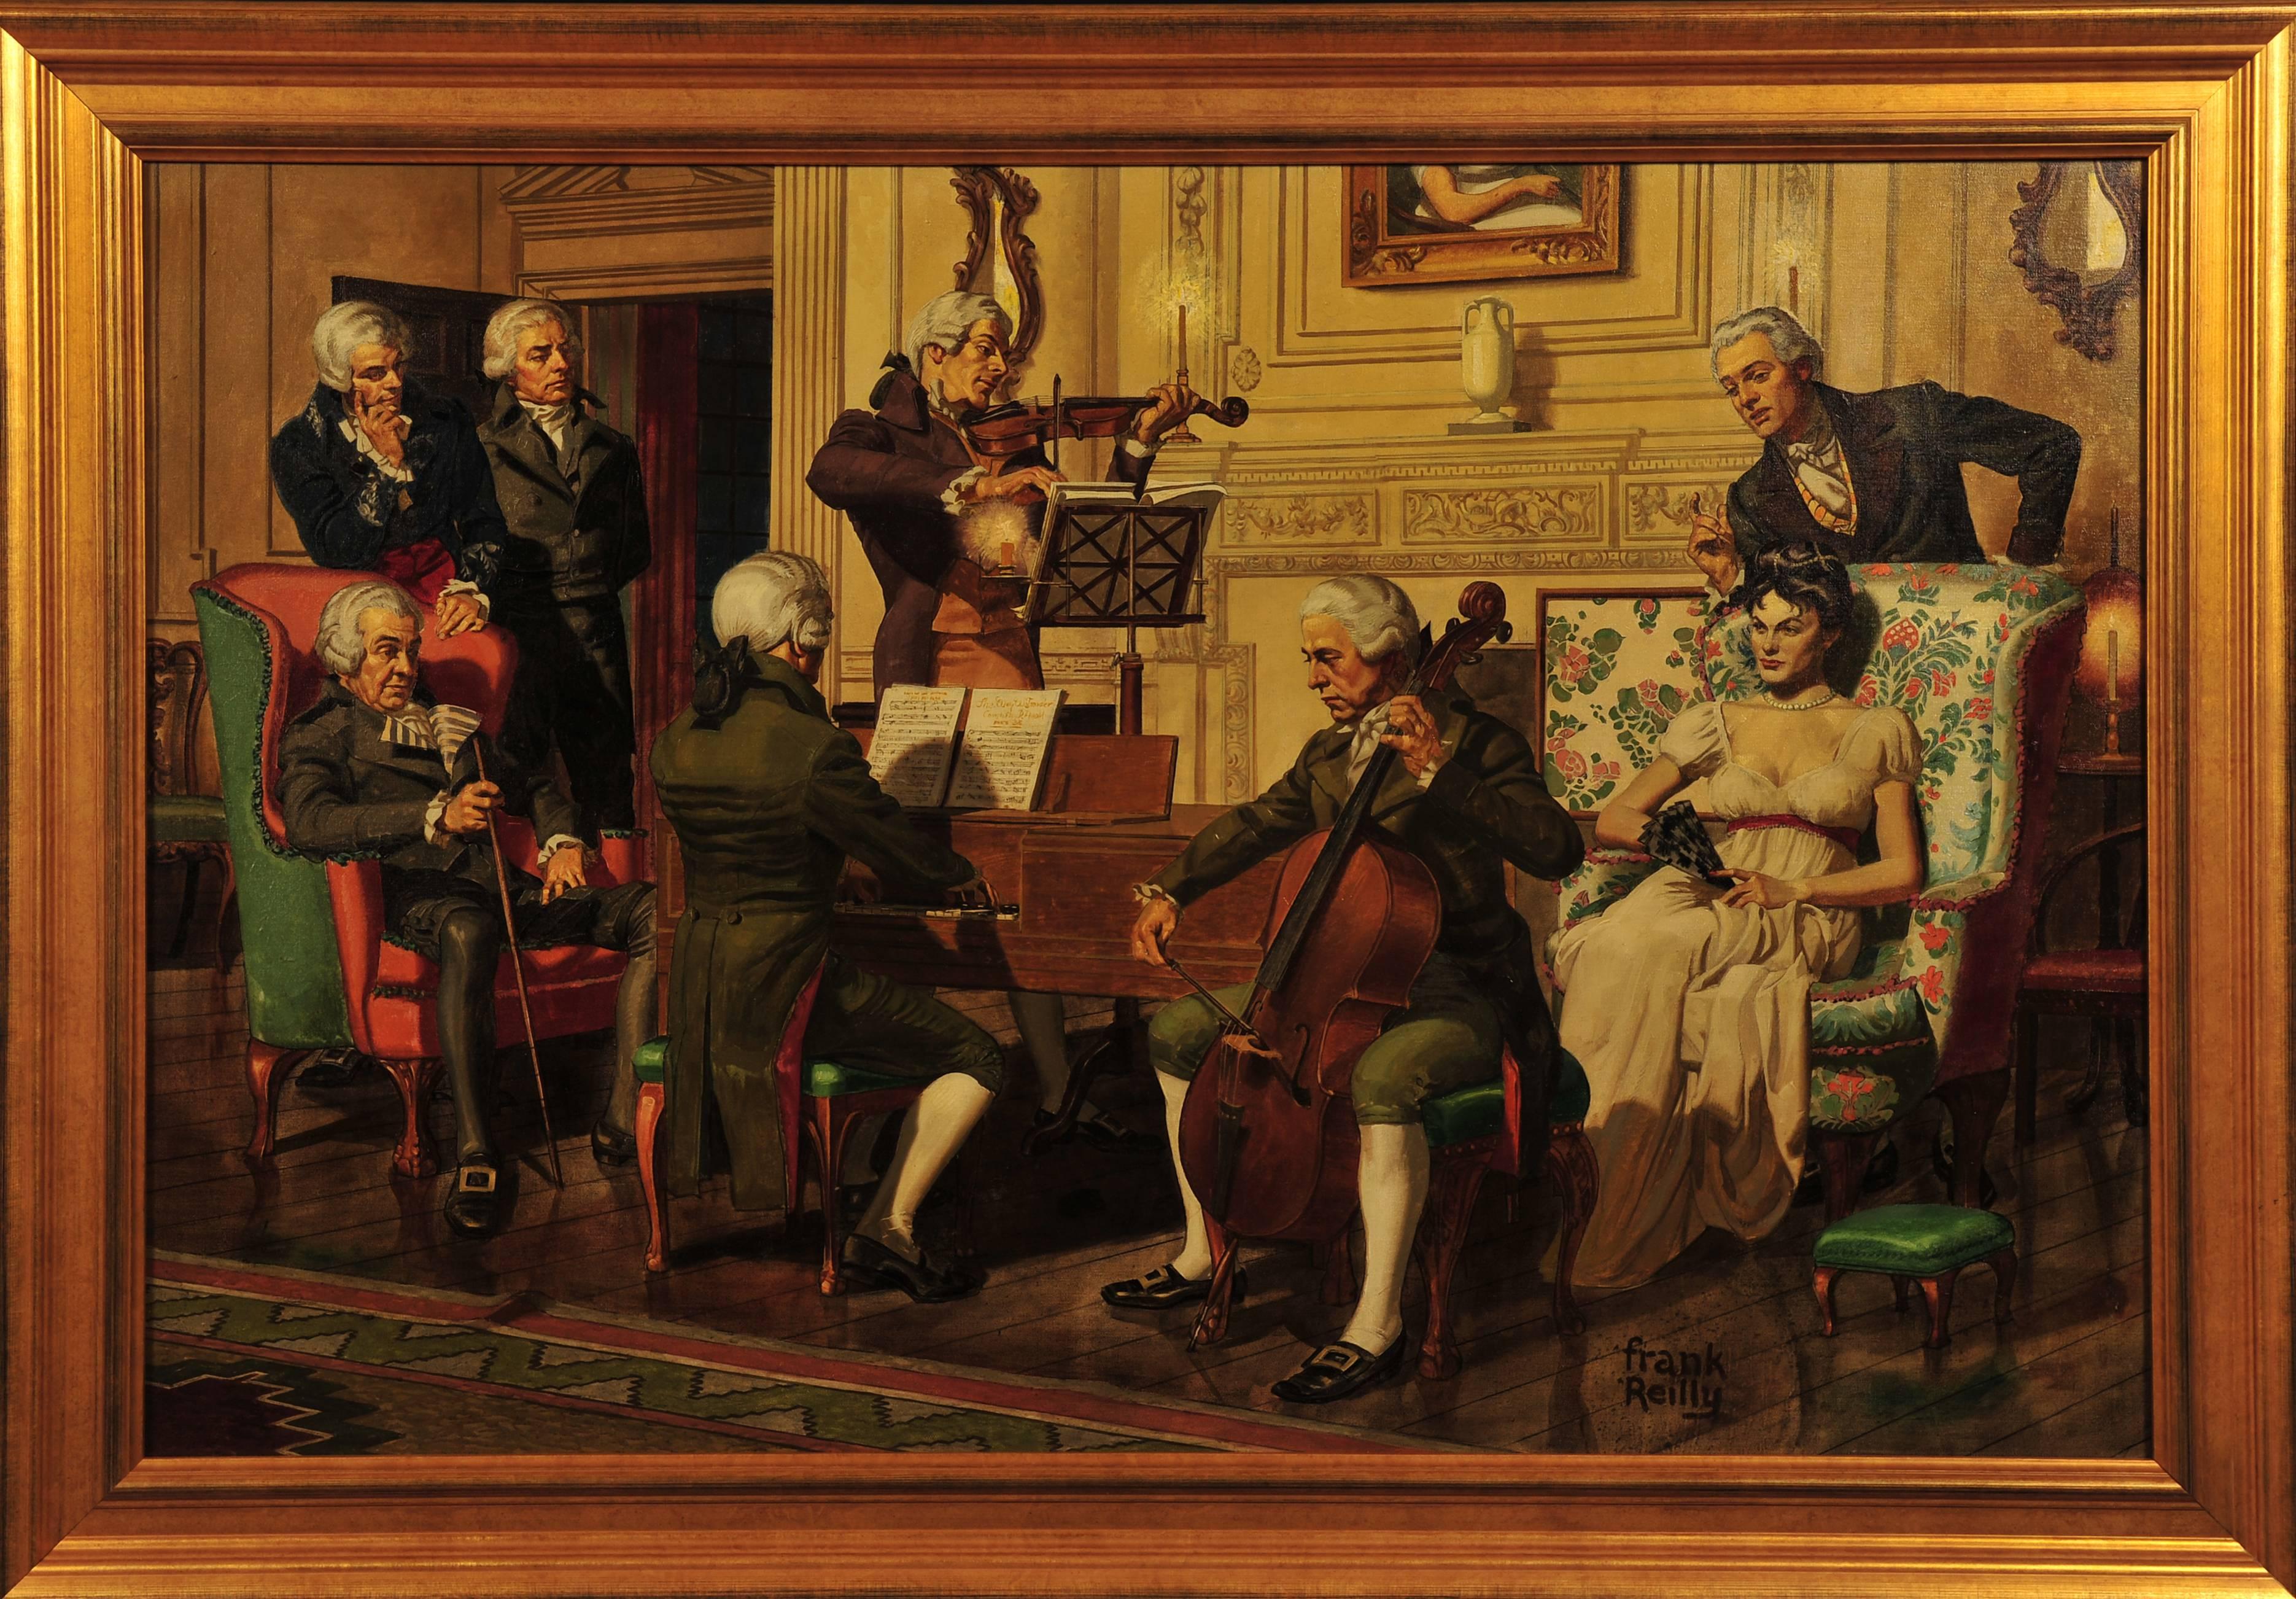 Colonists Playing Music - Painting by Frank J. Reilly